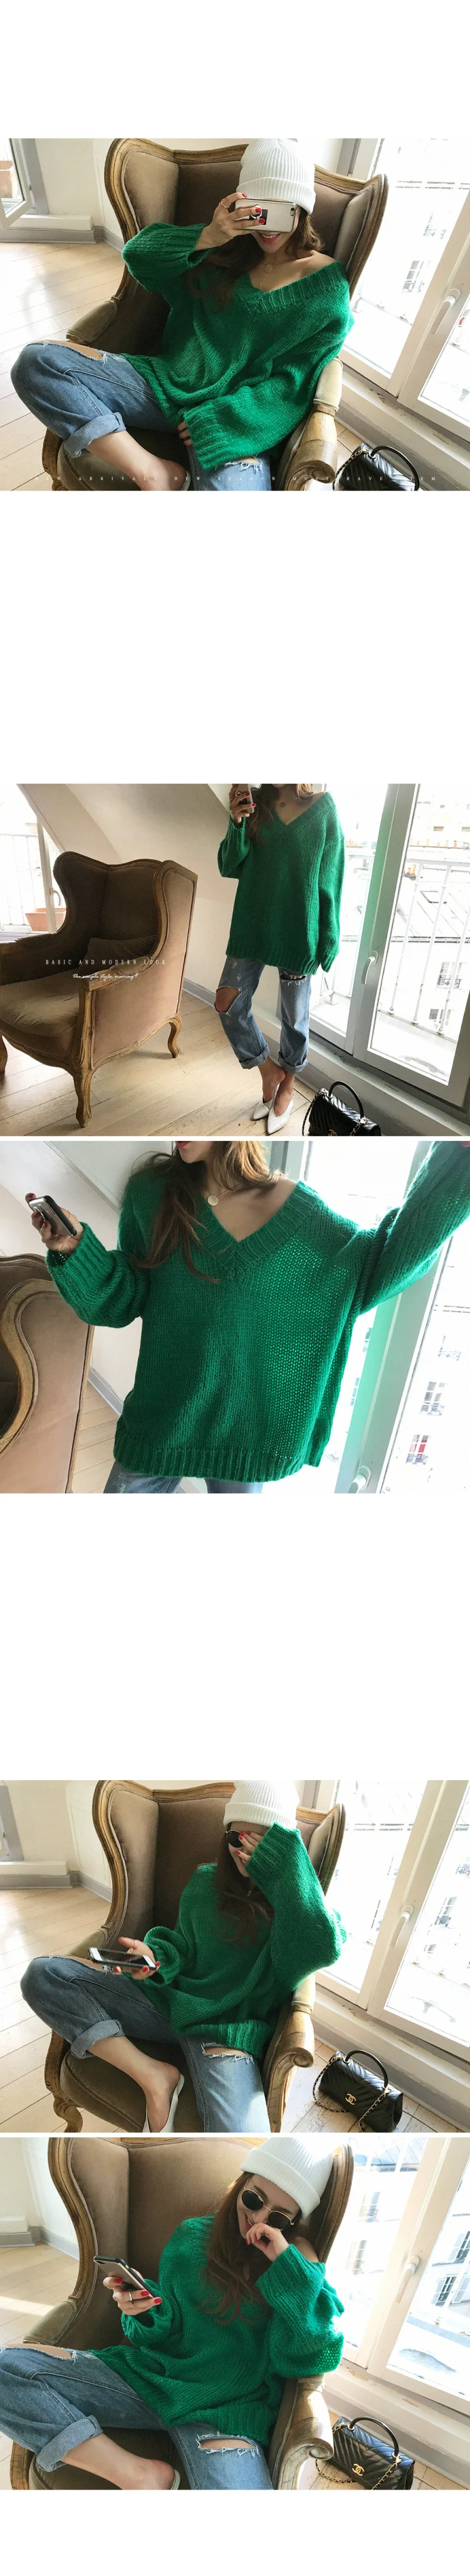 Autumn New Women's Pullovers Sweater Mohair Knitting Hollow Out V-neck Loose Korean Female Casual Fashion Tops T98319D